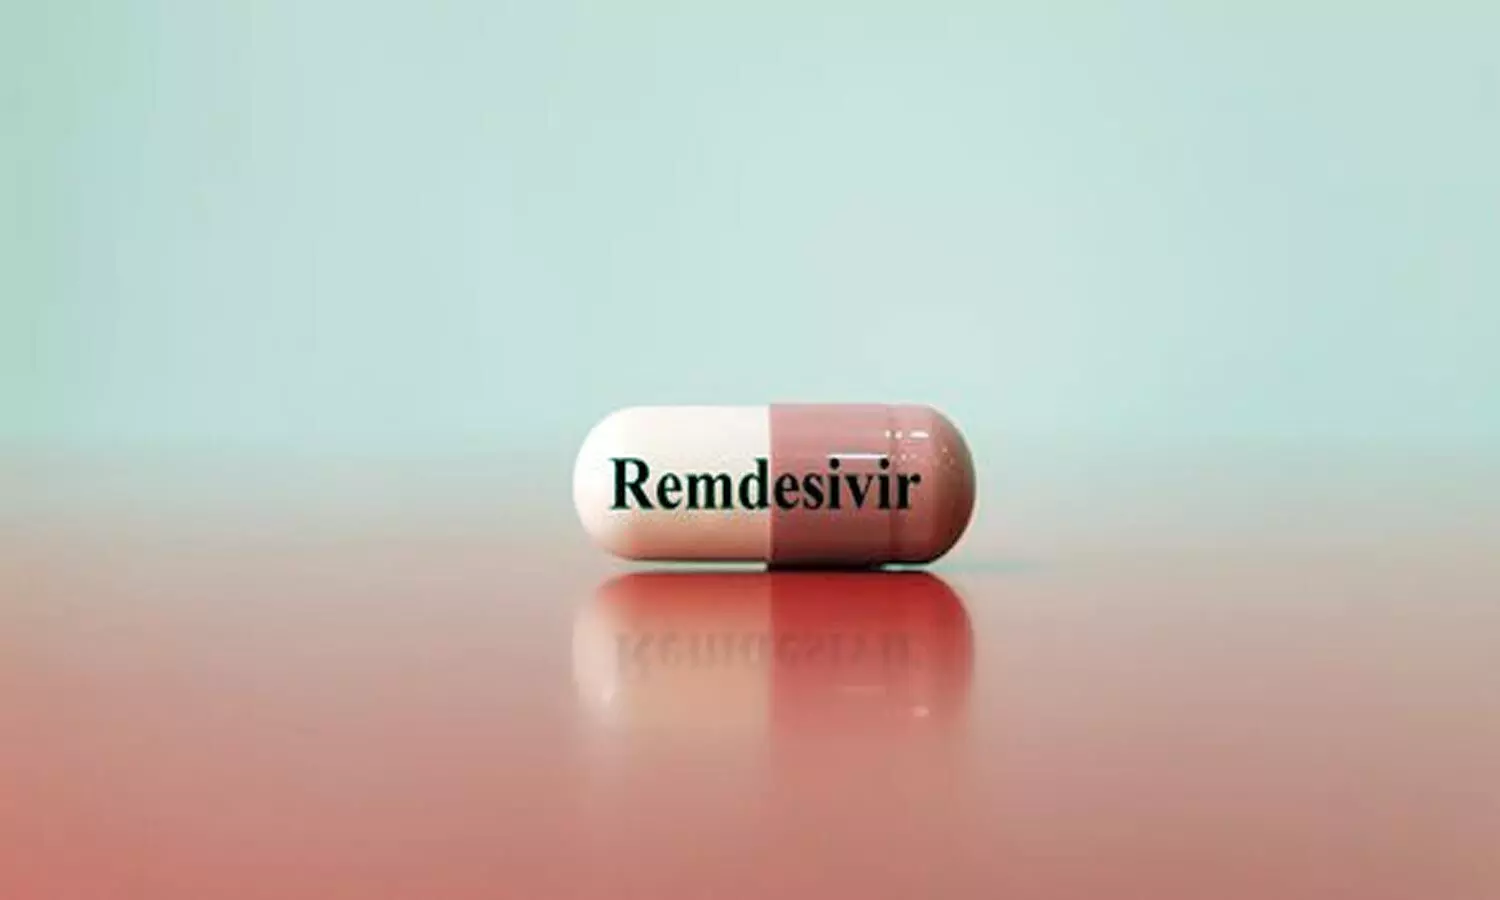 US OKAY to treat seriously ill COVID-19 patients with Remdesivir